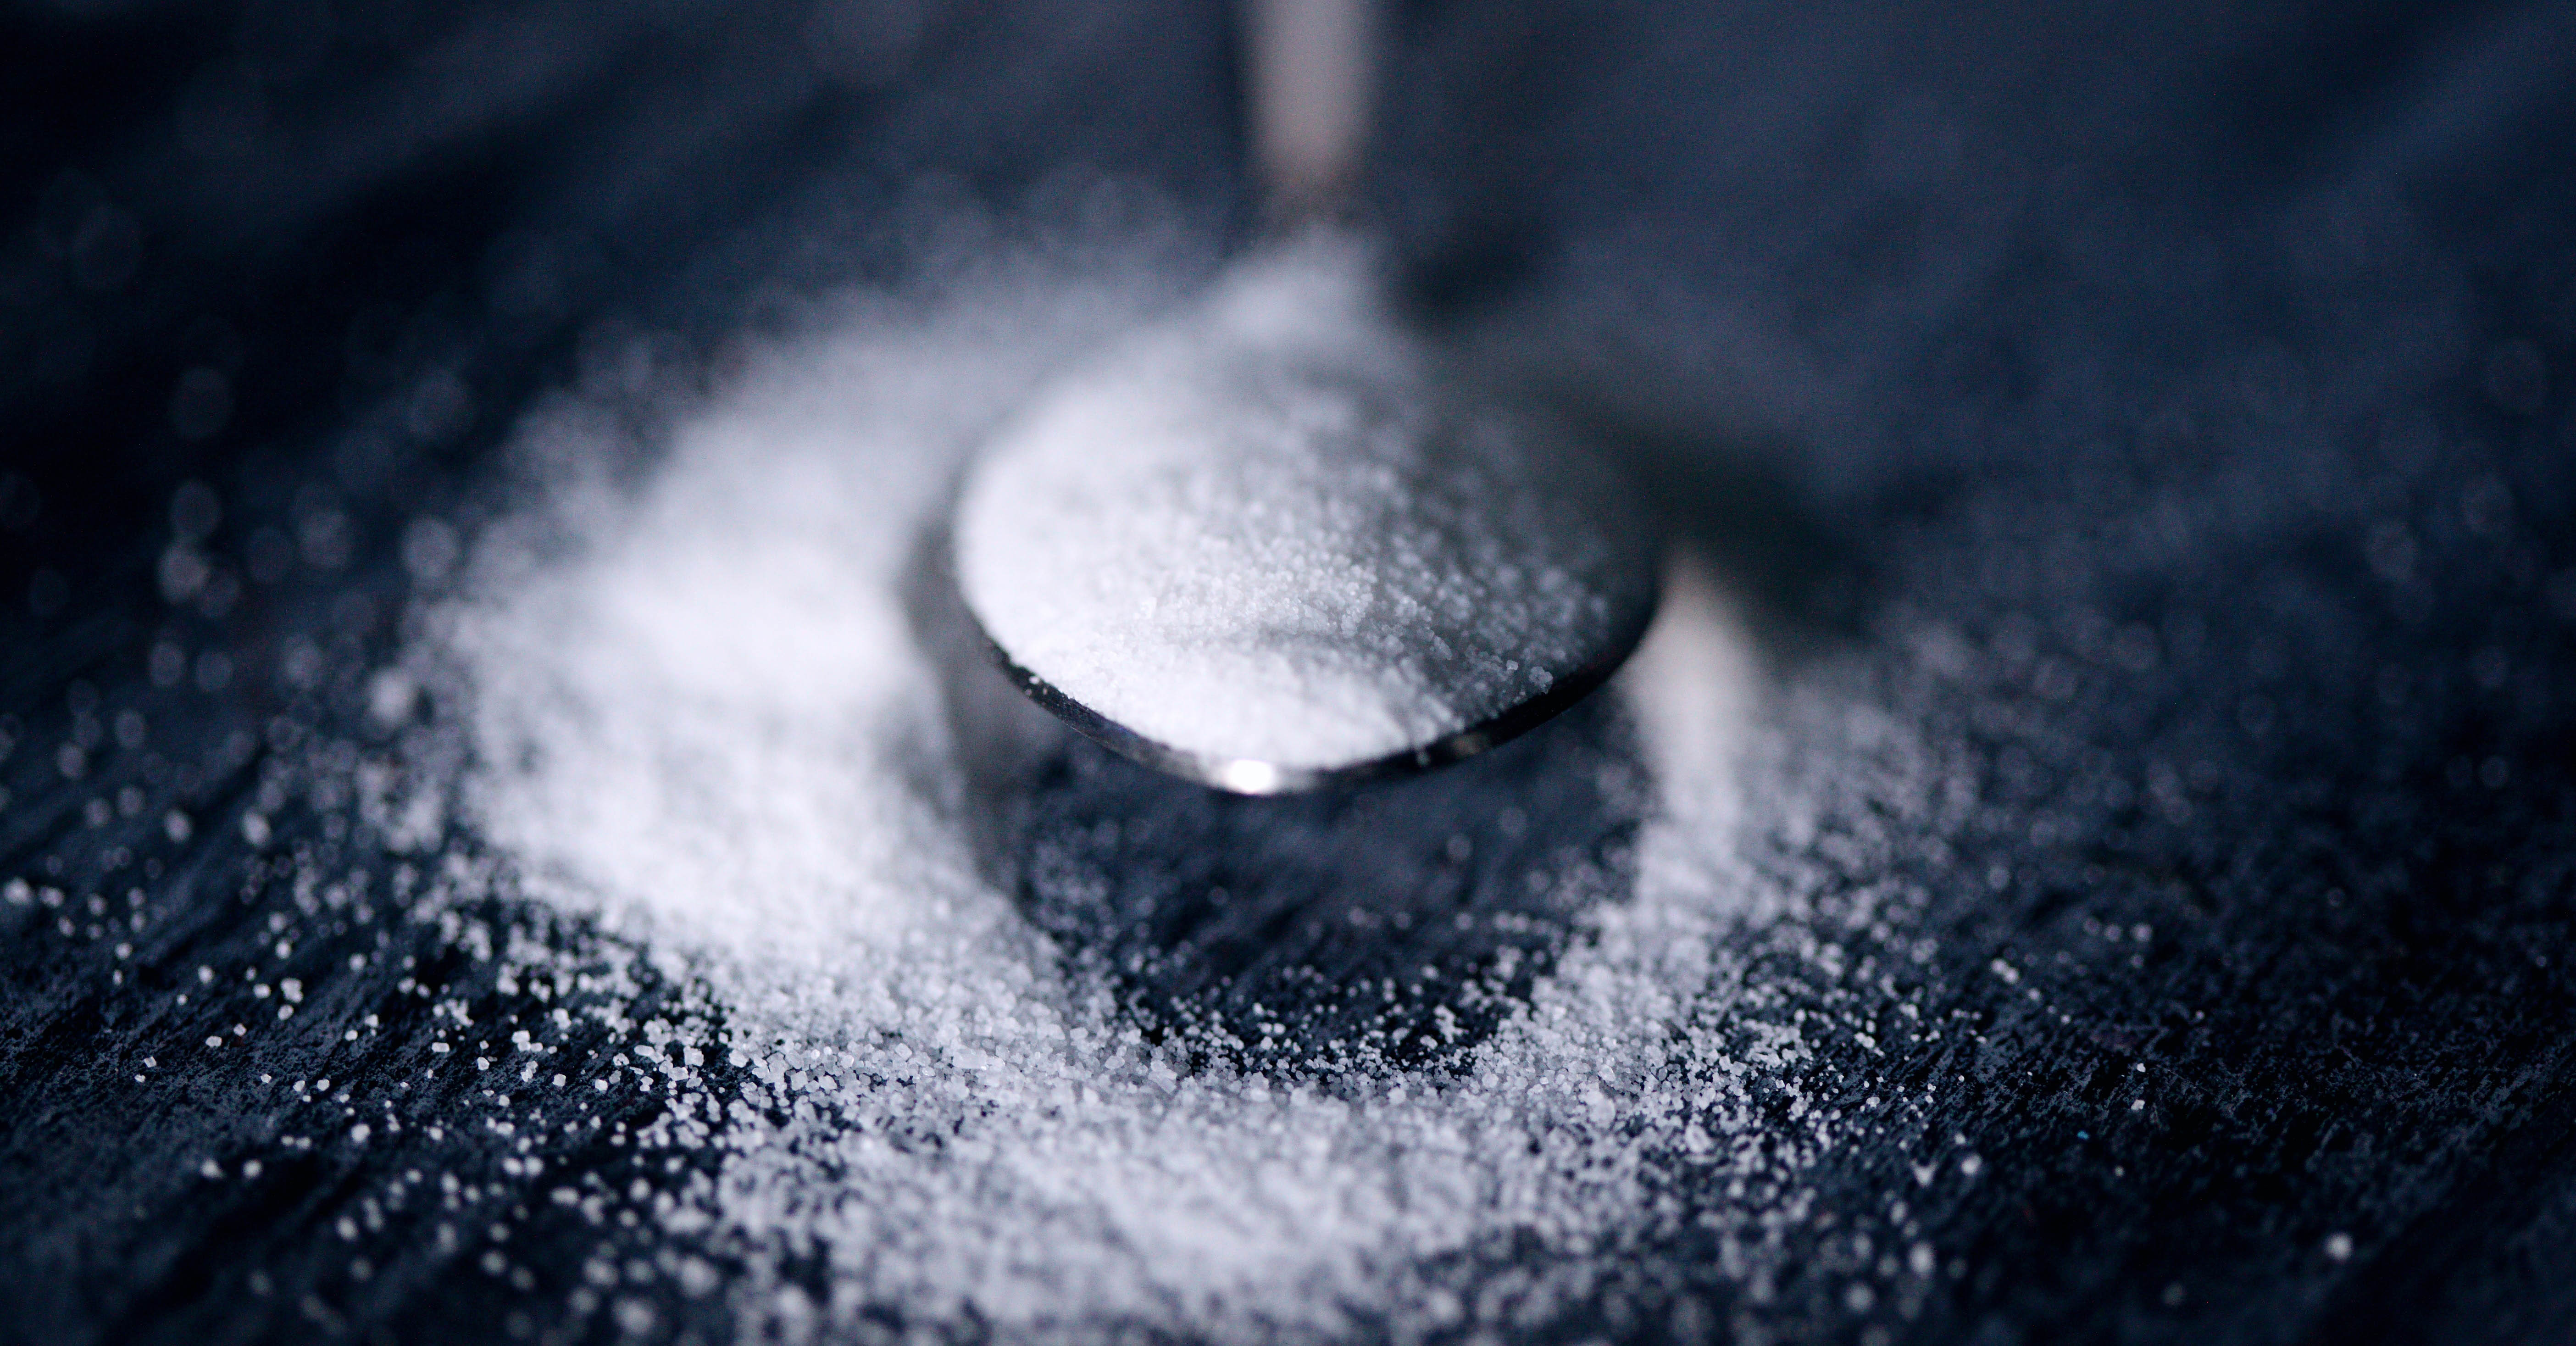 Aspartame and cancer: A toxicologist's take